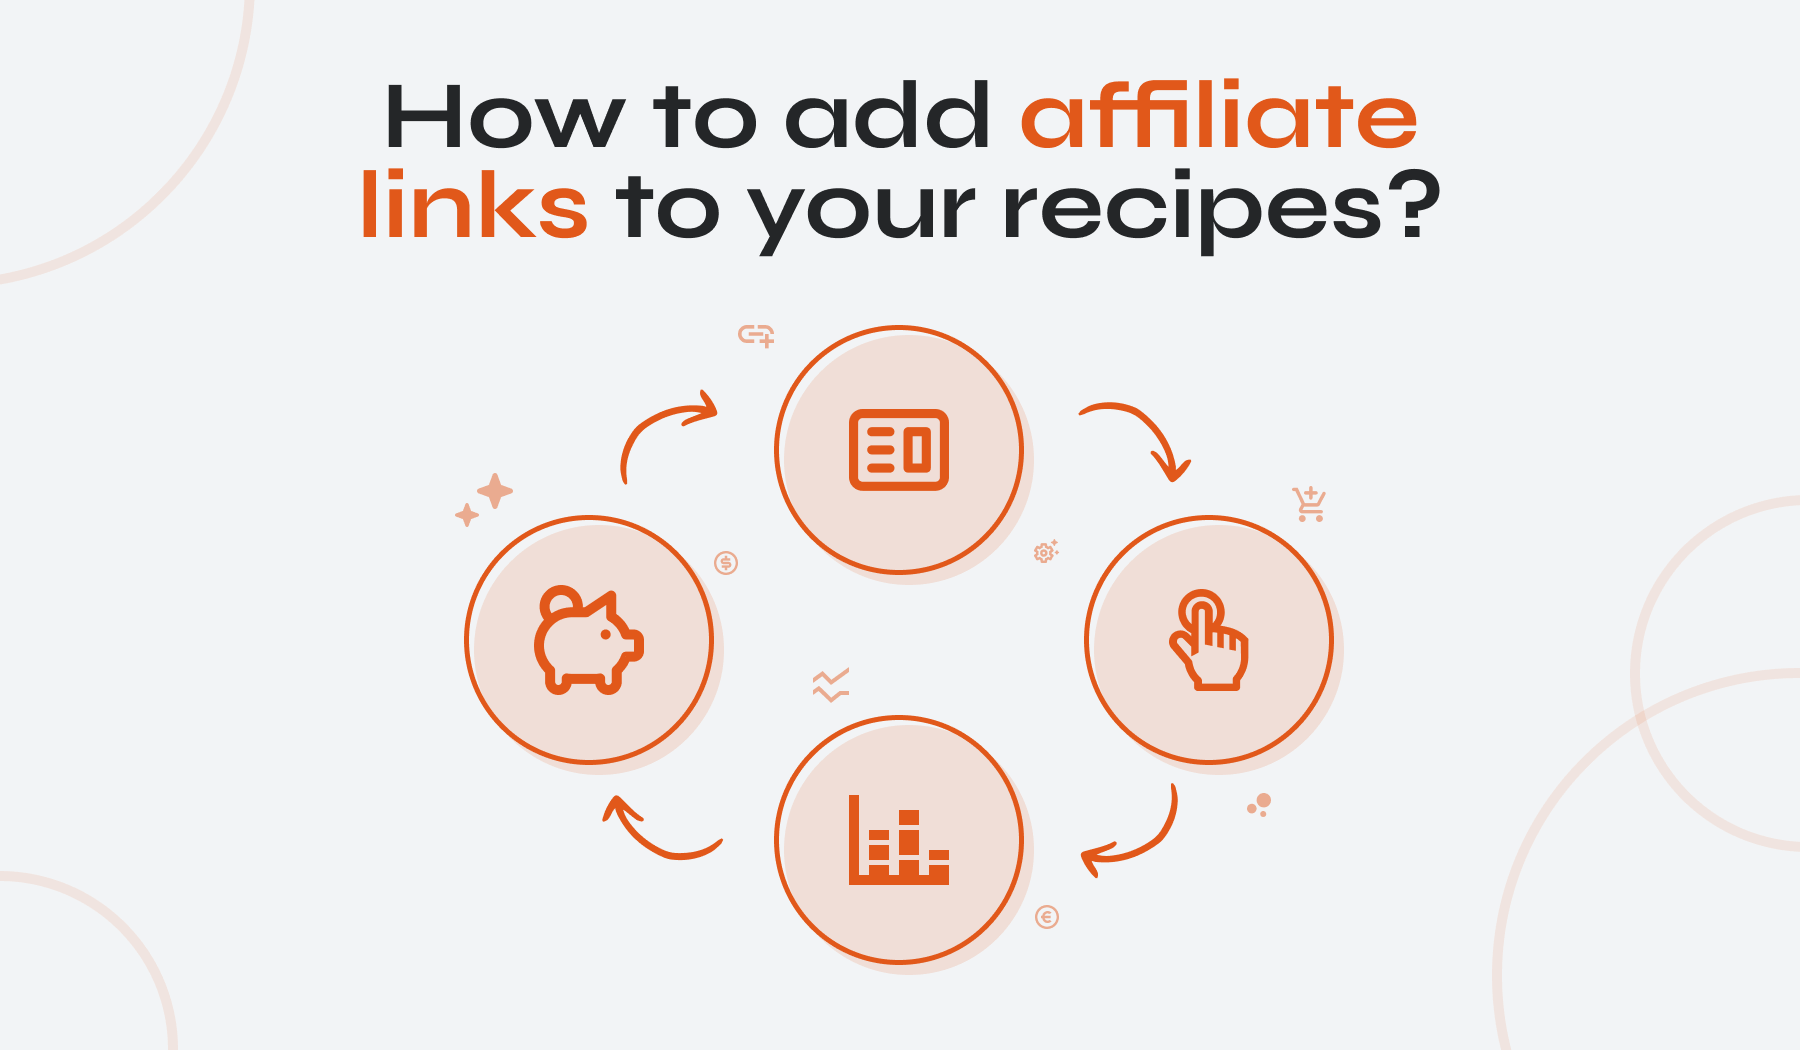 How to Add Affiliate Links to Your Recipes